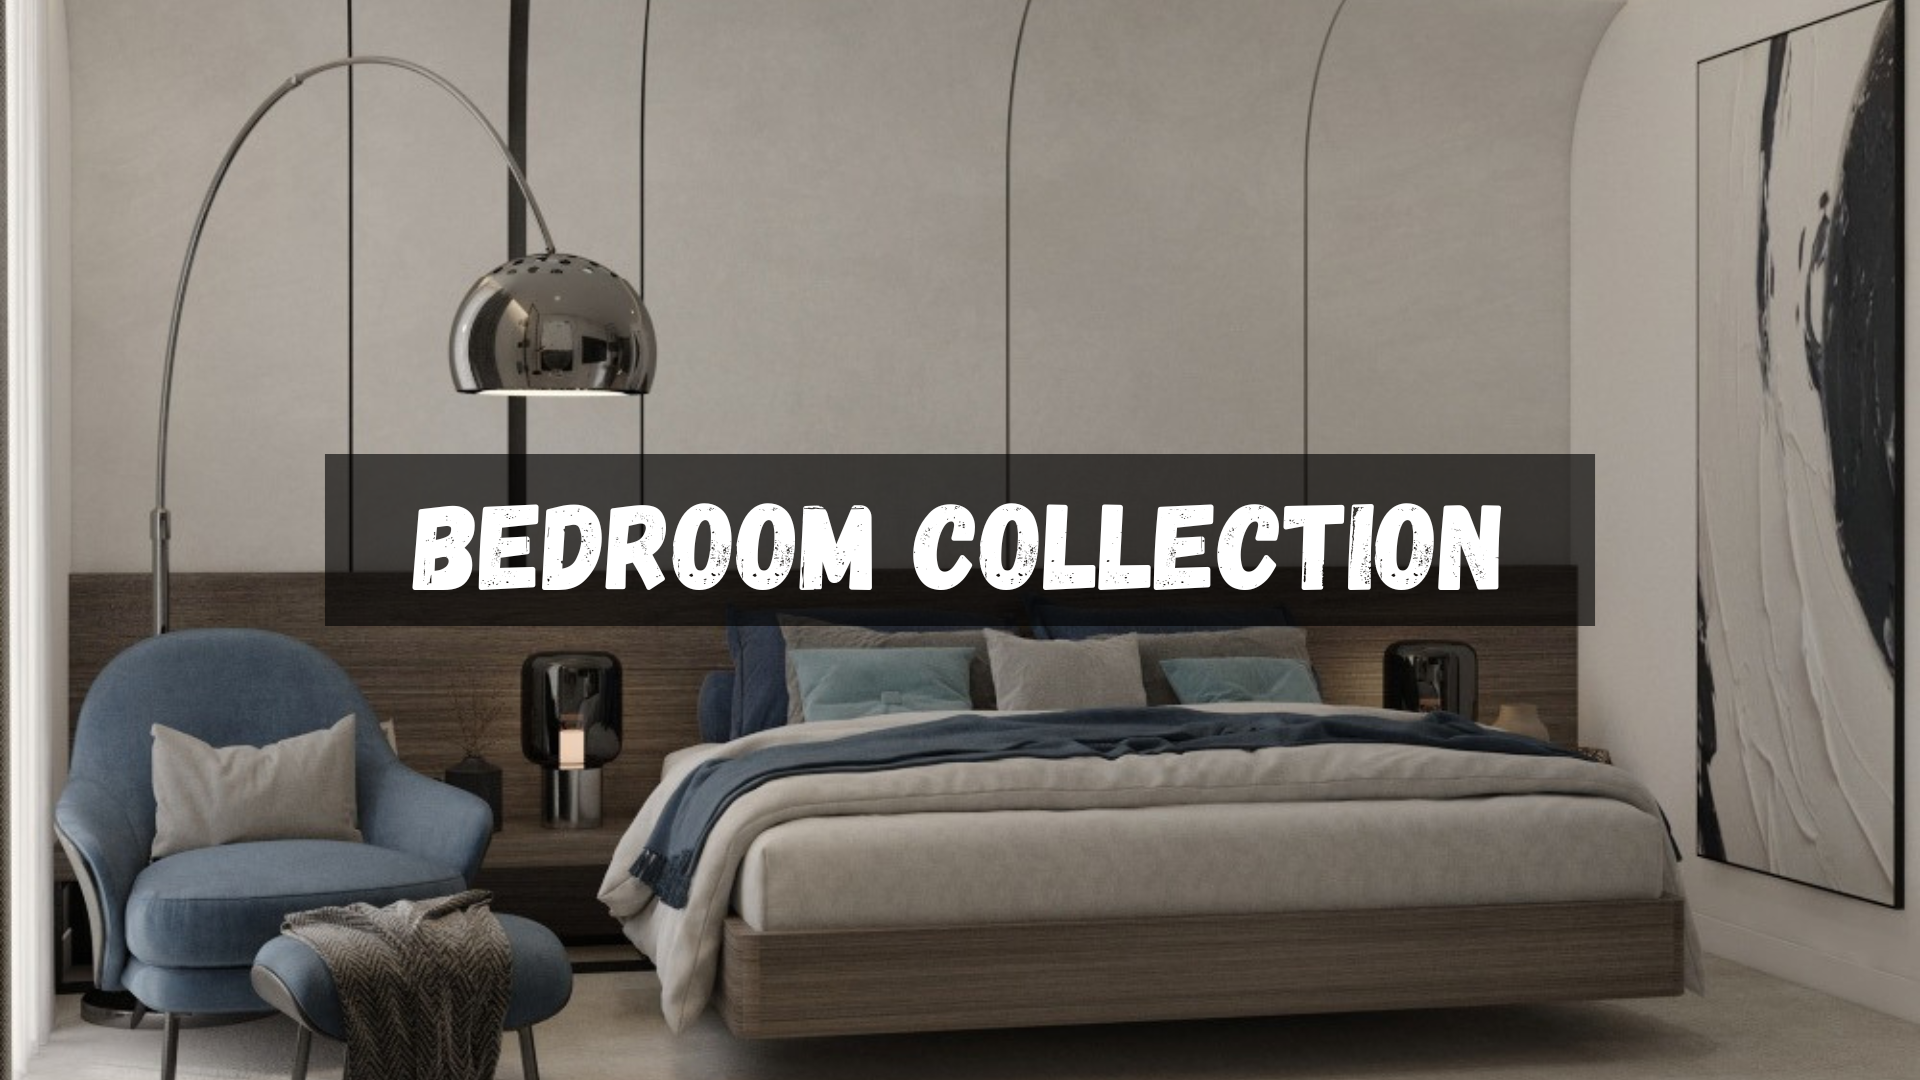 BEDROOM COLLECTION